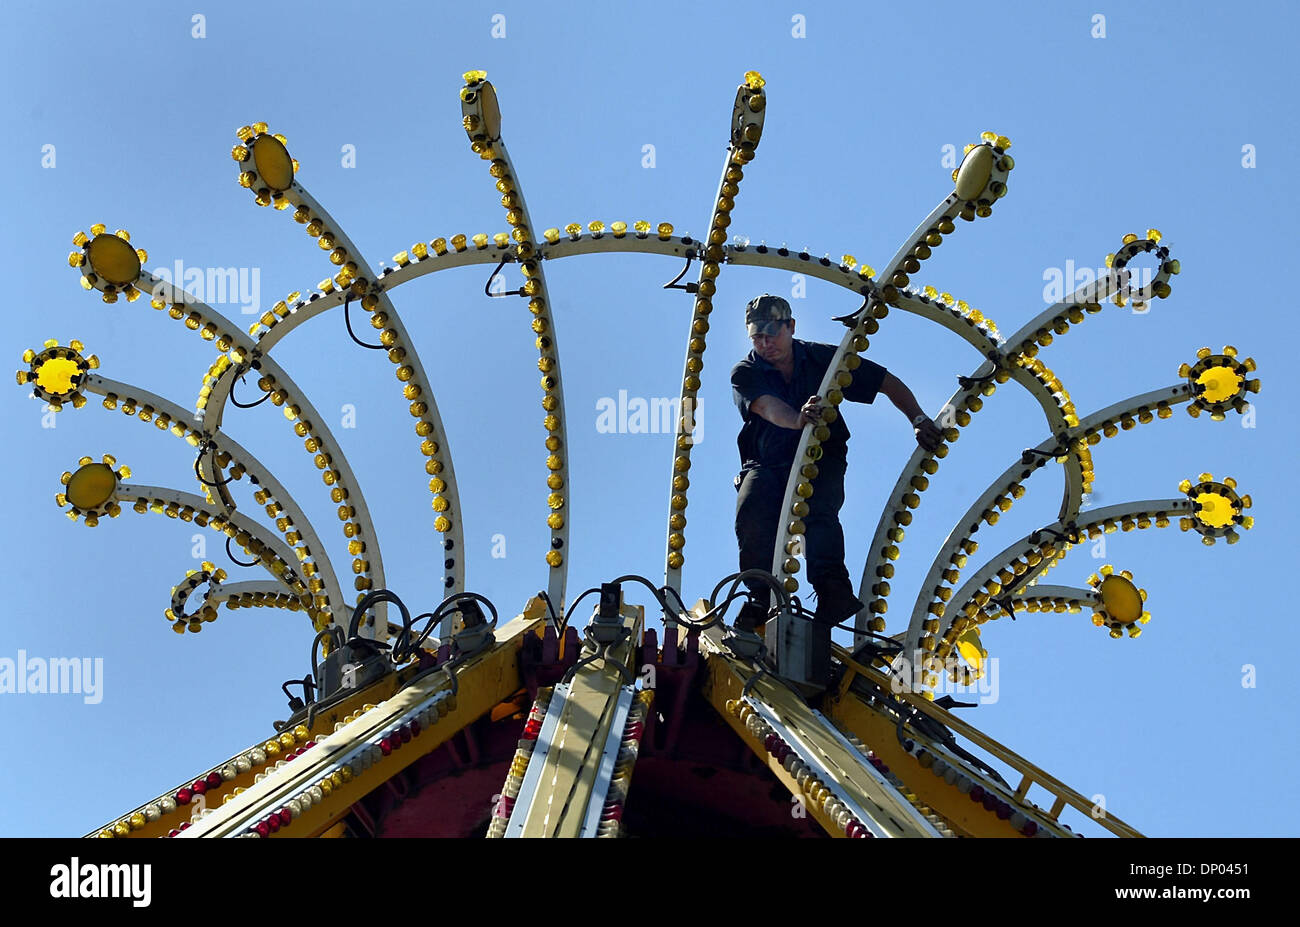 Feb 28, 2006; Delray Beach, FL, USA; A carnival worker from Hildebrand  Rides walks among the lights atop the YoYo ride as they set up 26  mechanical rides for this year's 39th